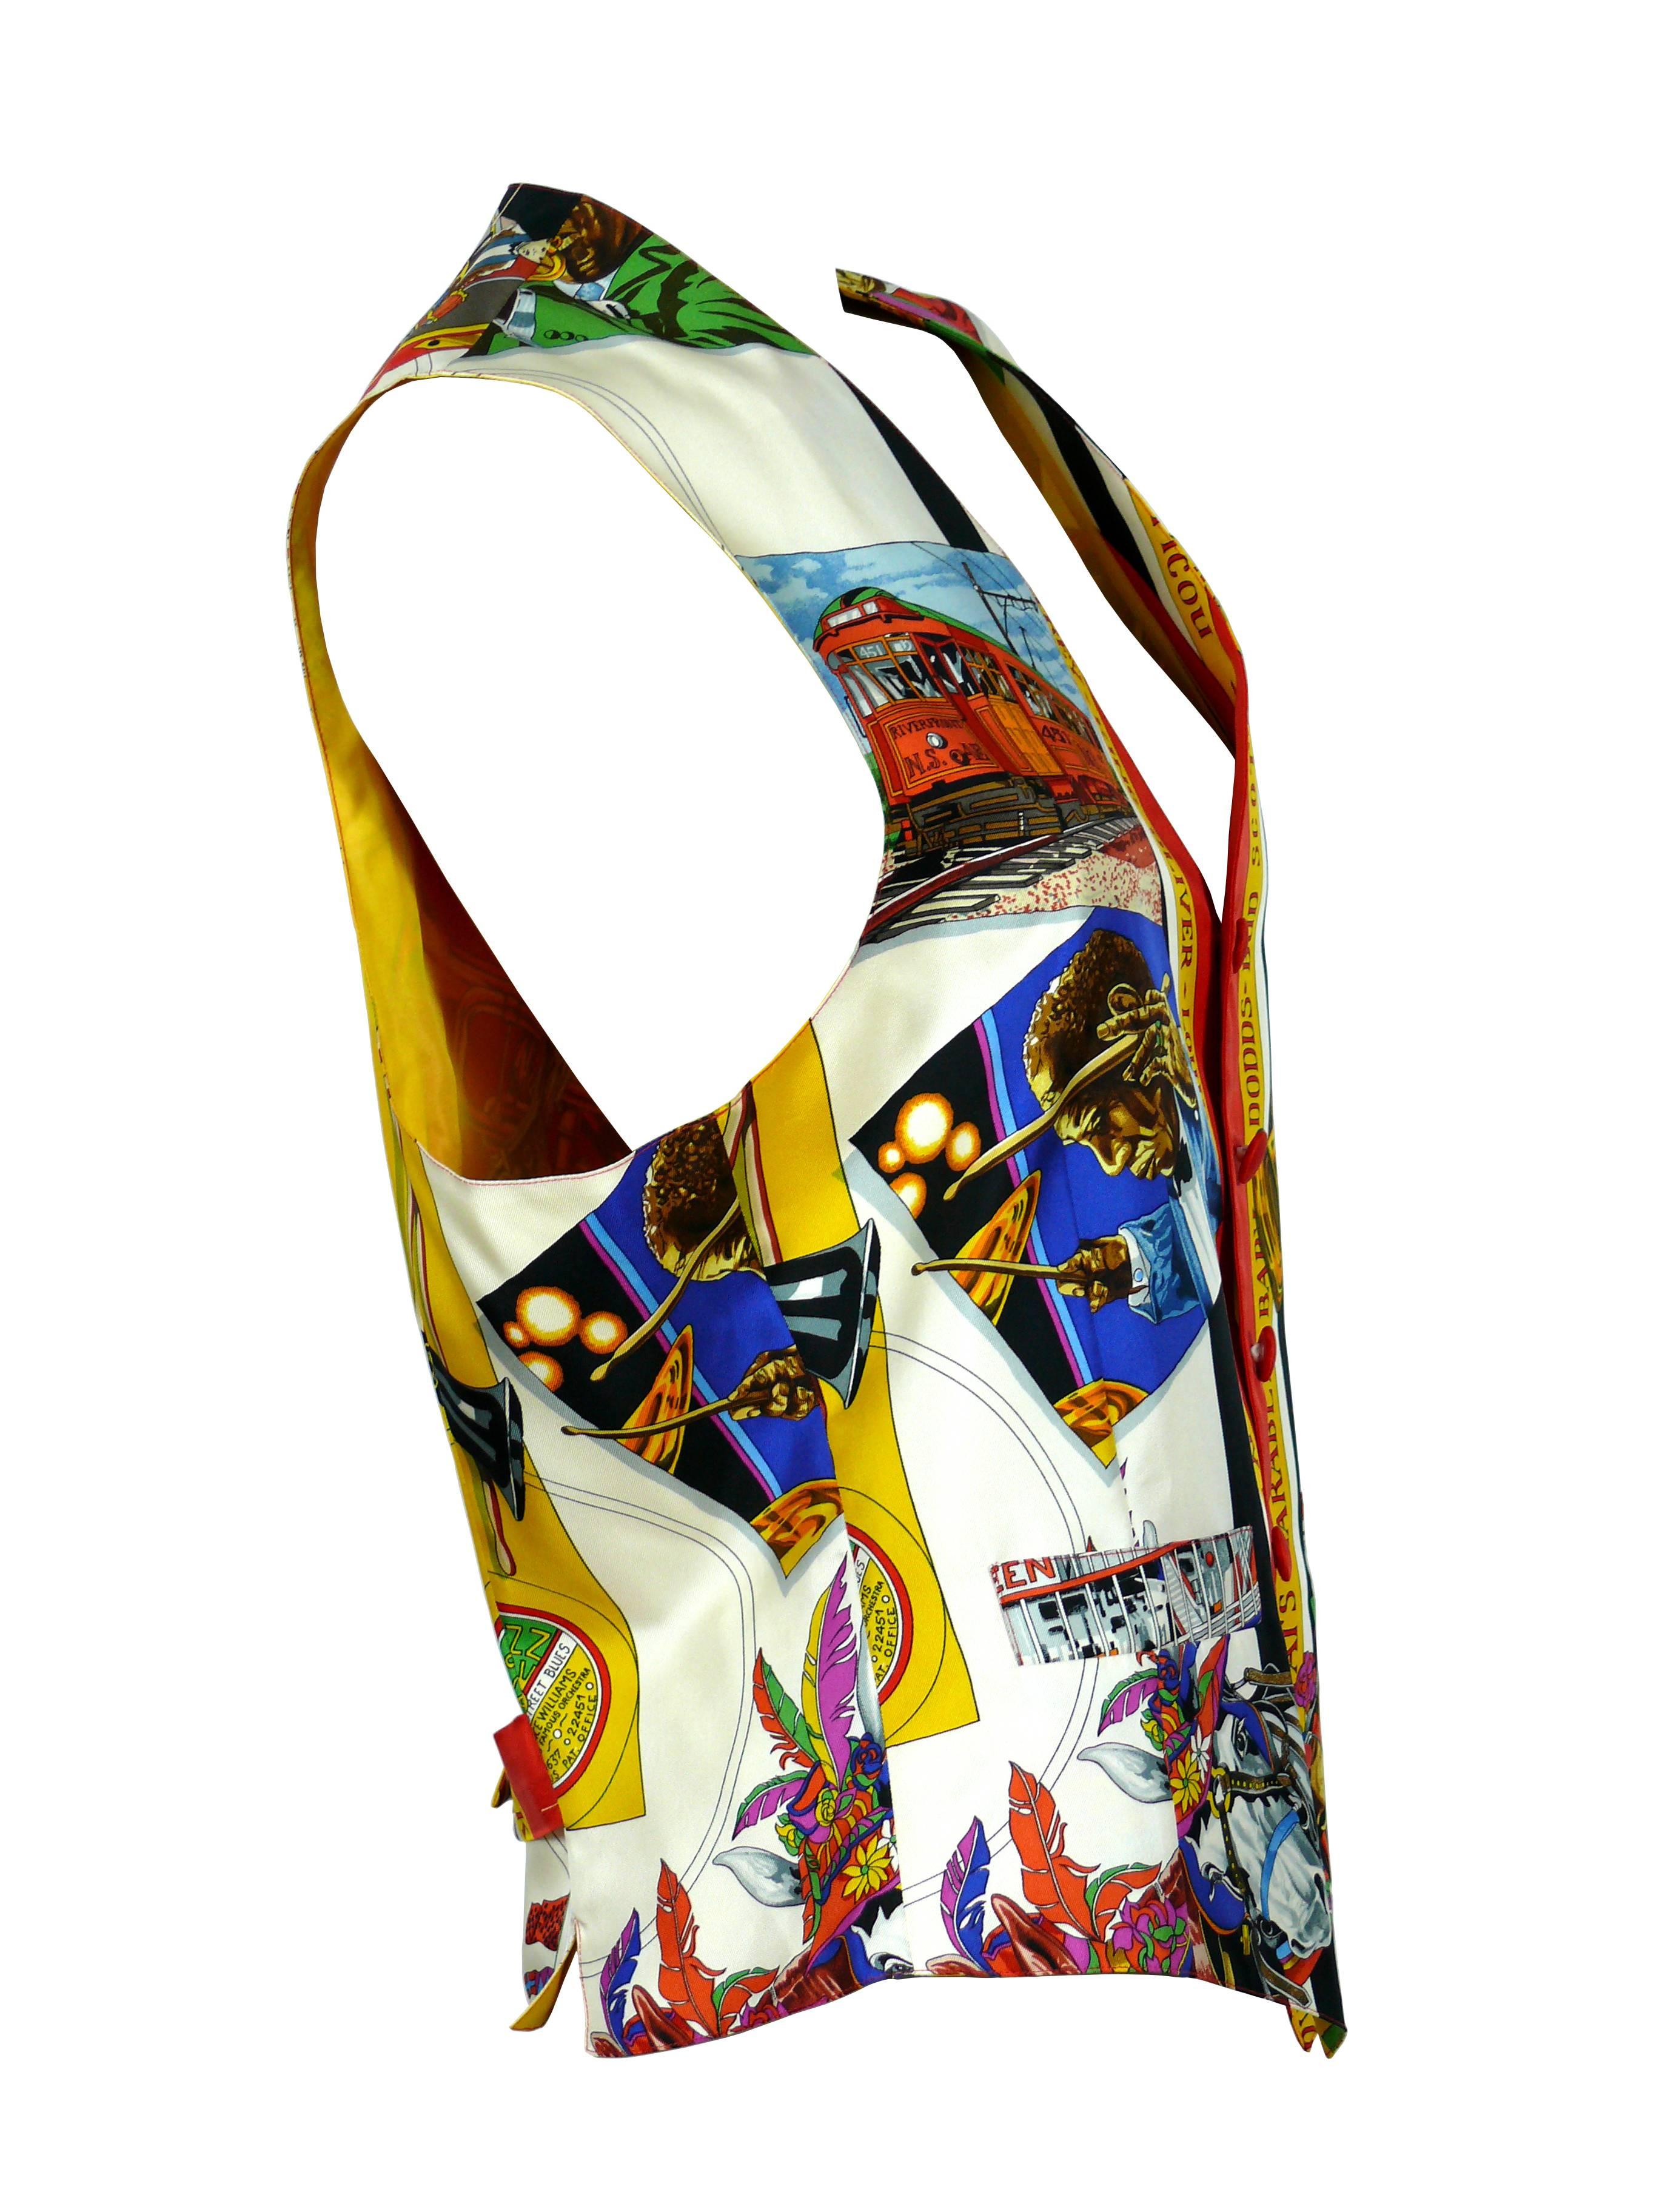 HERMES New Orleans Jazz printed vest featuring iconic jazz memorabalia and musicians.

Multicolor design on a off-white background.
Five front buttons.
Two slip pockets on front.
V-neck.
Back tie.

Label reads HERMES.

Size tag reads : 50.
Please